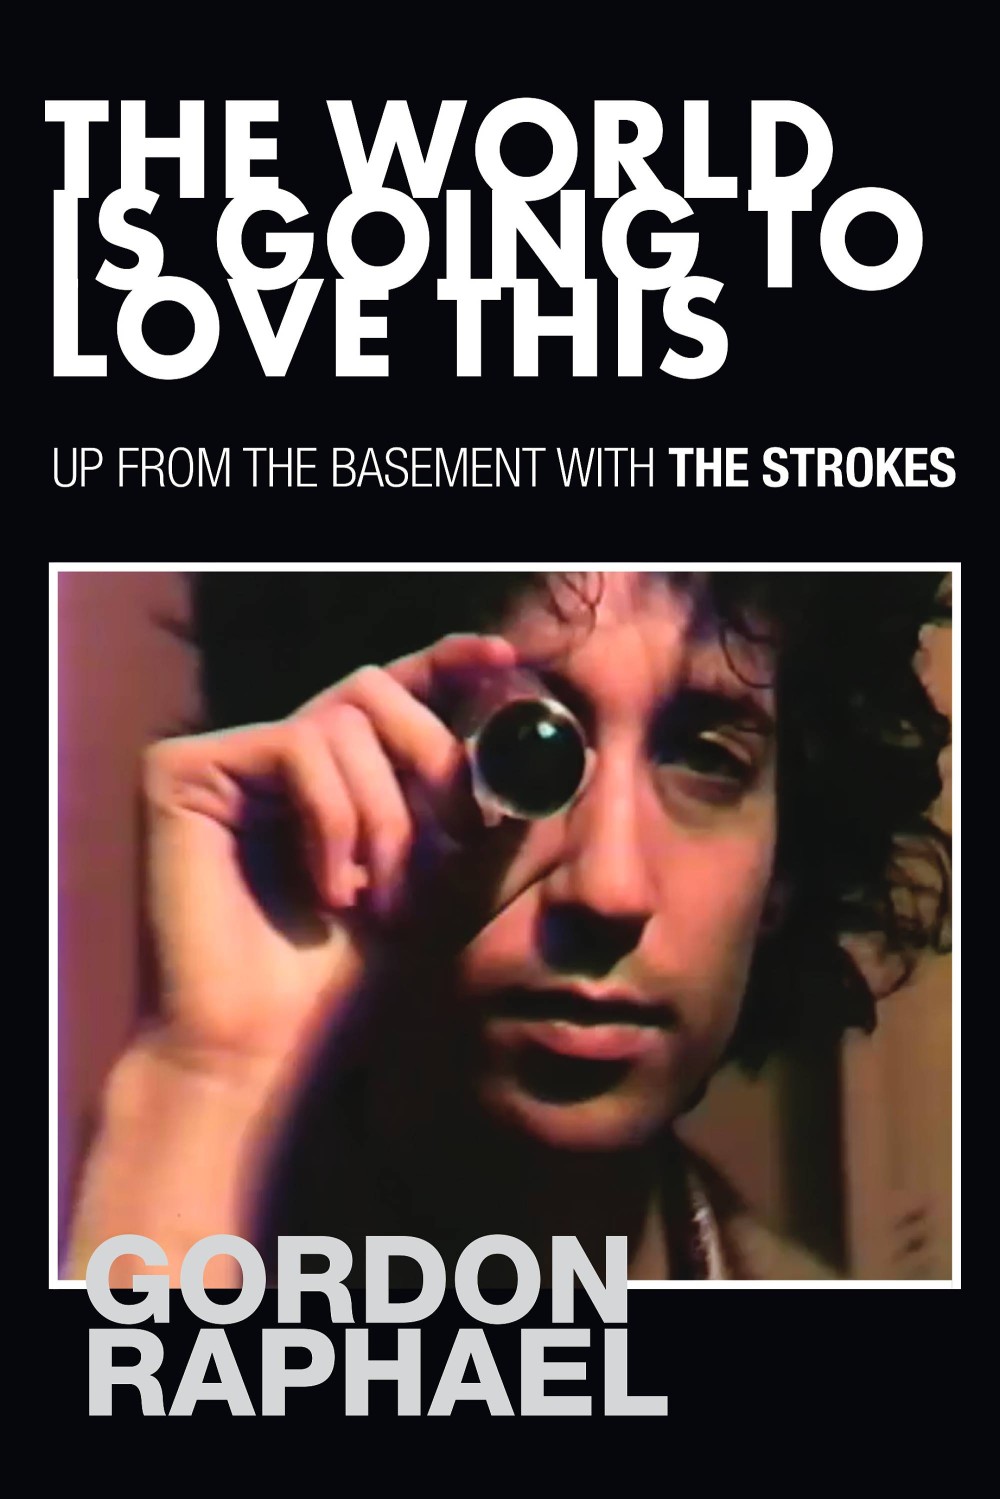 'Is This It' producer Gordon Raphael shares the cover of his new book, 'The World Is Going To Love This: Up From The Basement With The Strokes' 